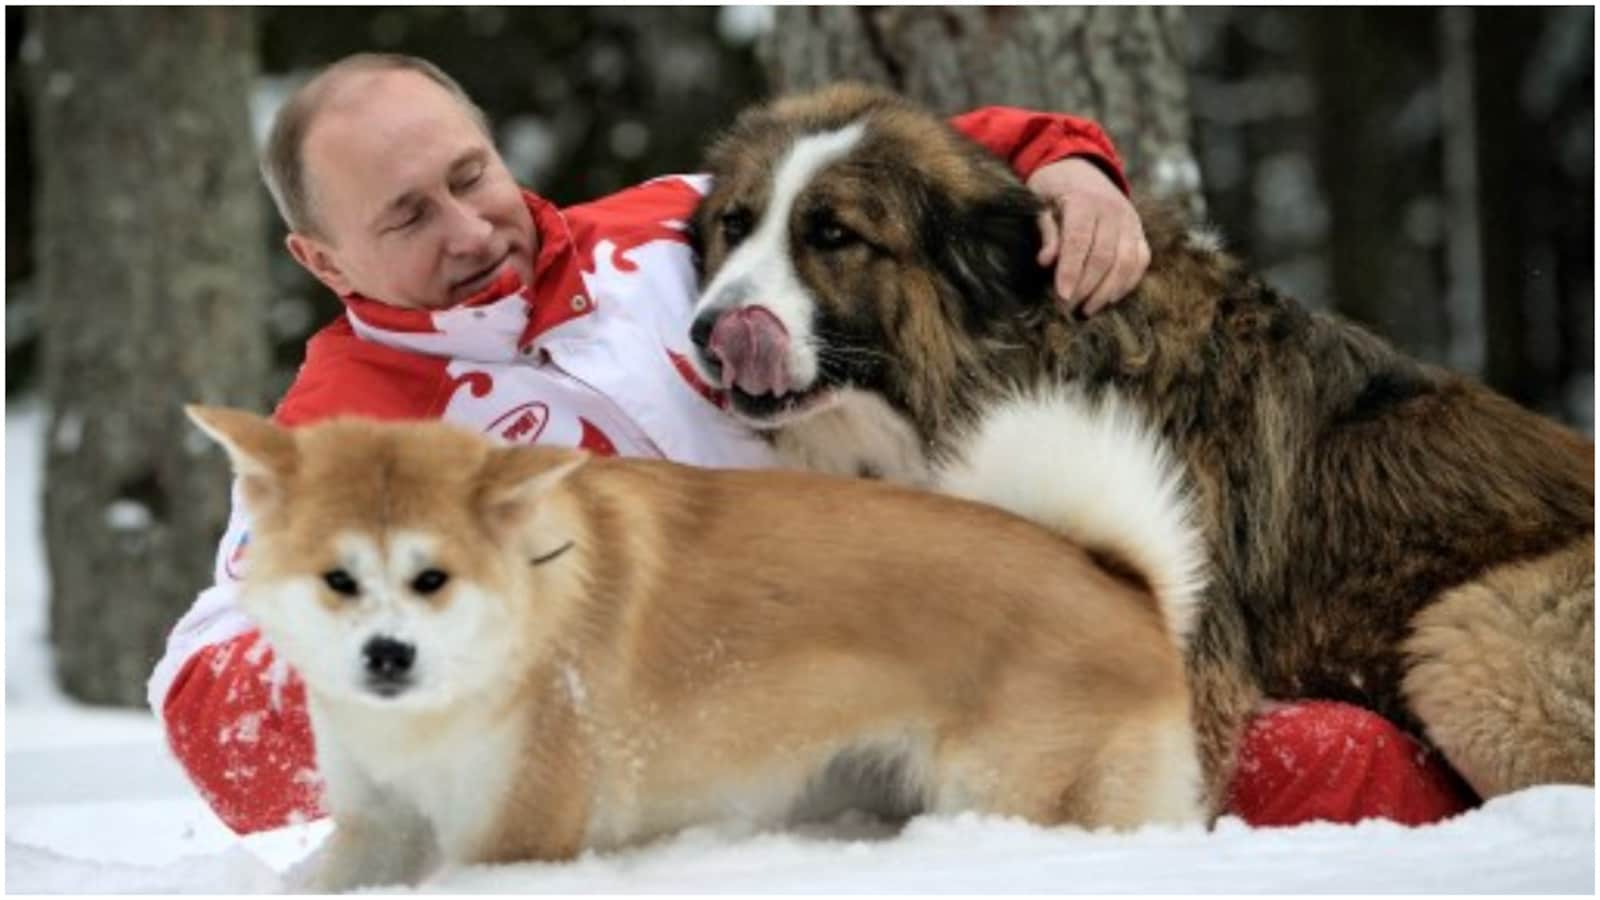 Putin's fans are on a mission to portray him as benevolent, animal-loving  leader: Report